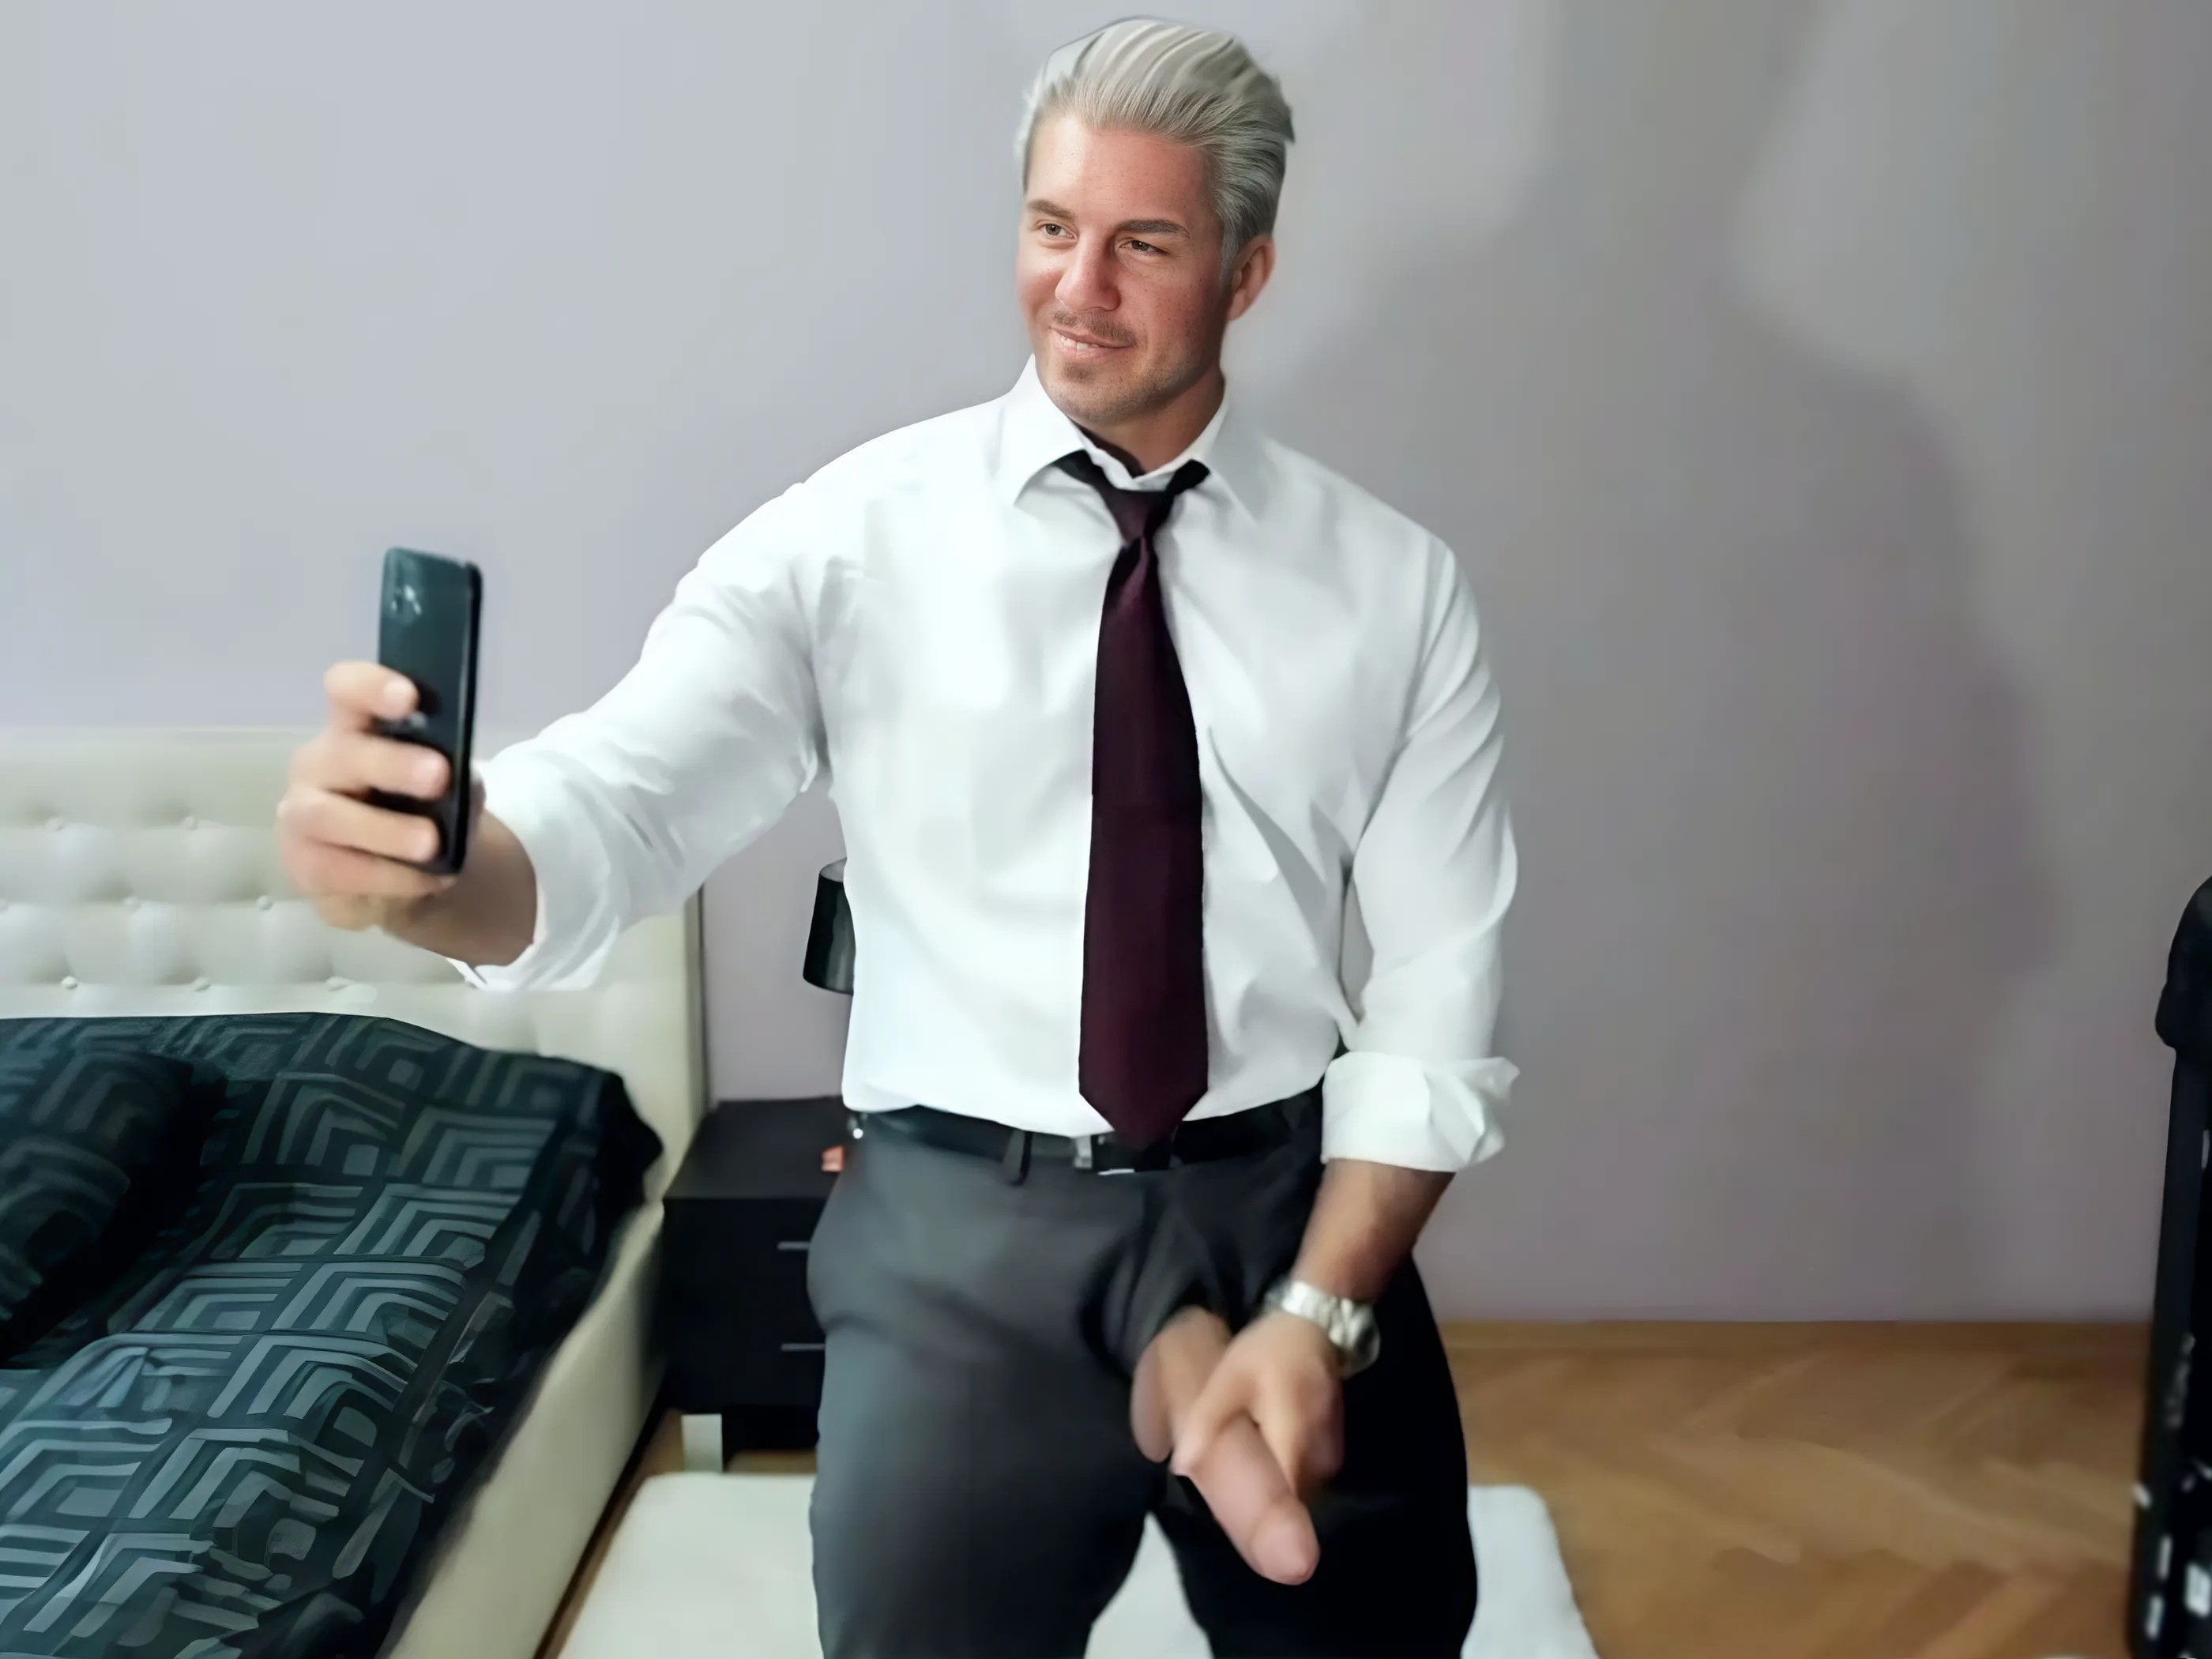 Silver Daddy Recording Hot Vids for Fans